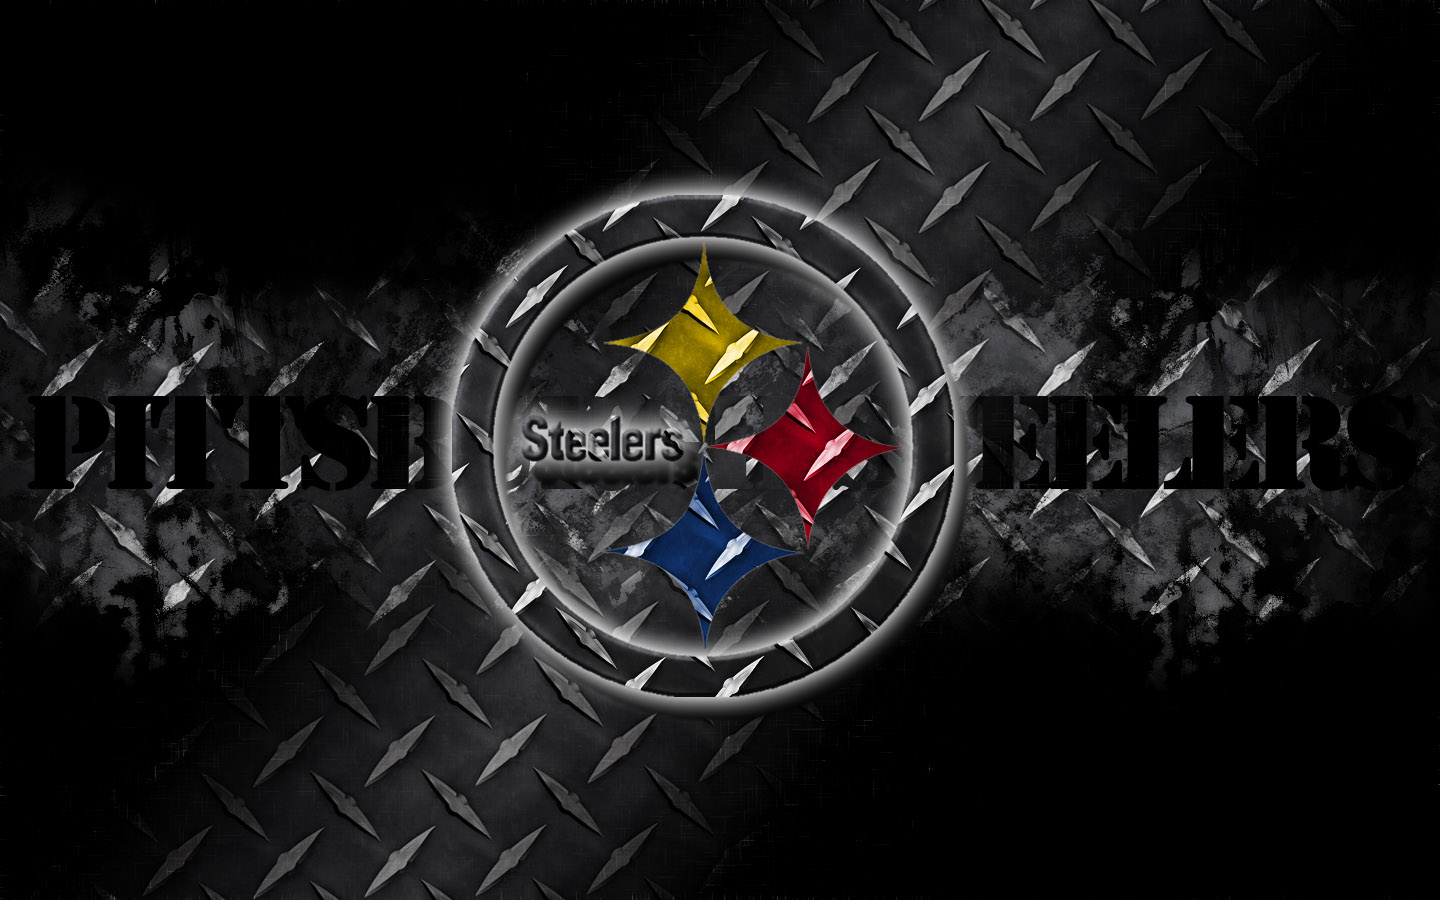 Pittsburgh Steelers Pictures American Football Films